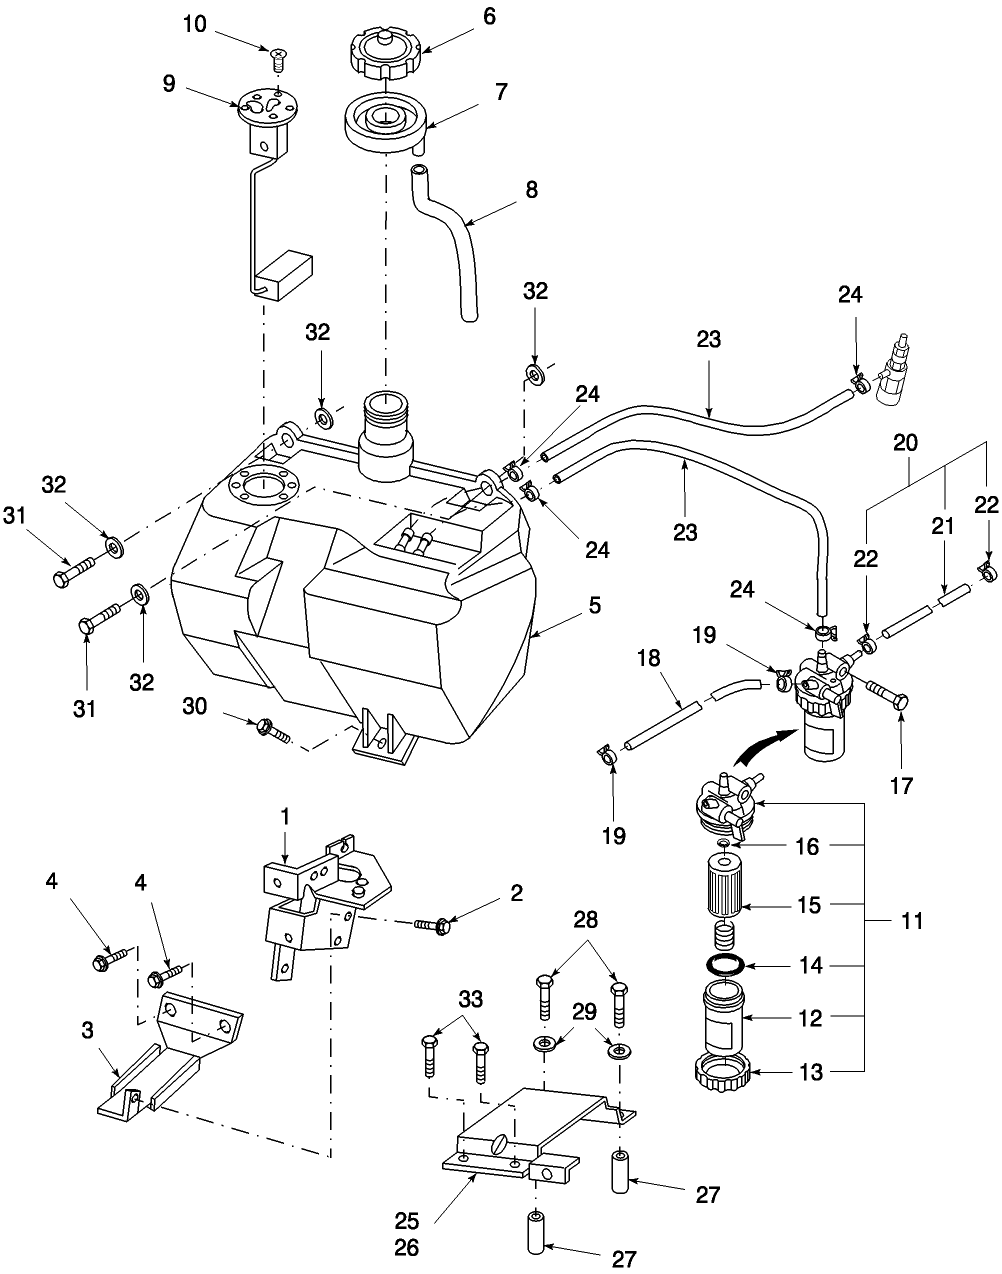 09A01 FUEL TANK & RELATED PARTS